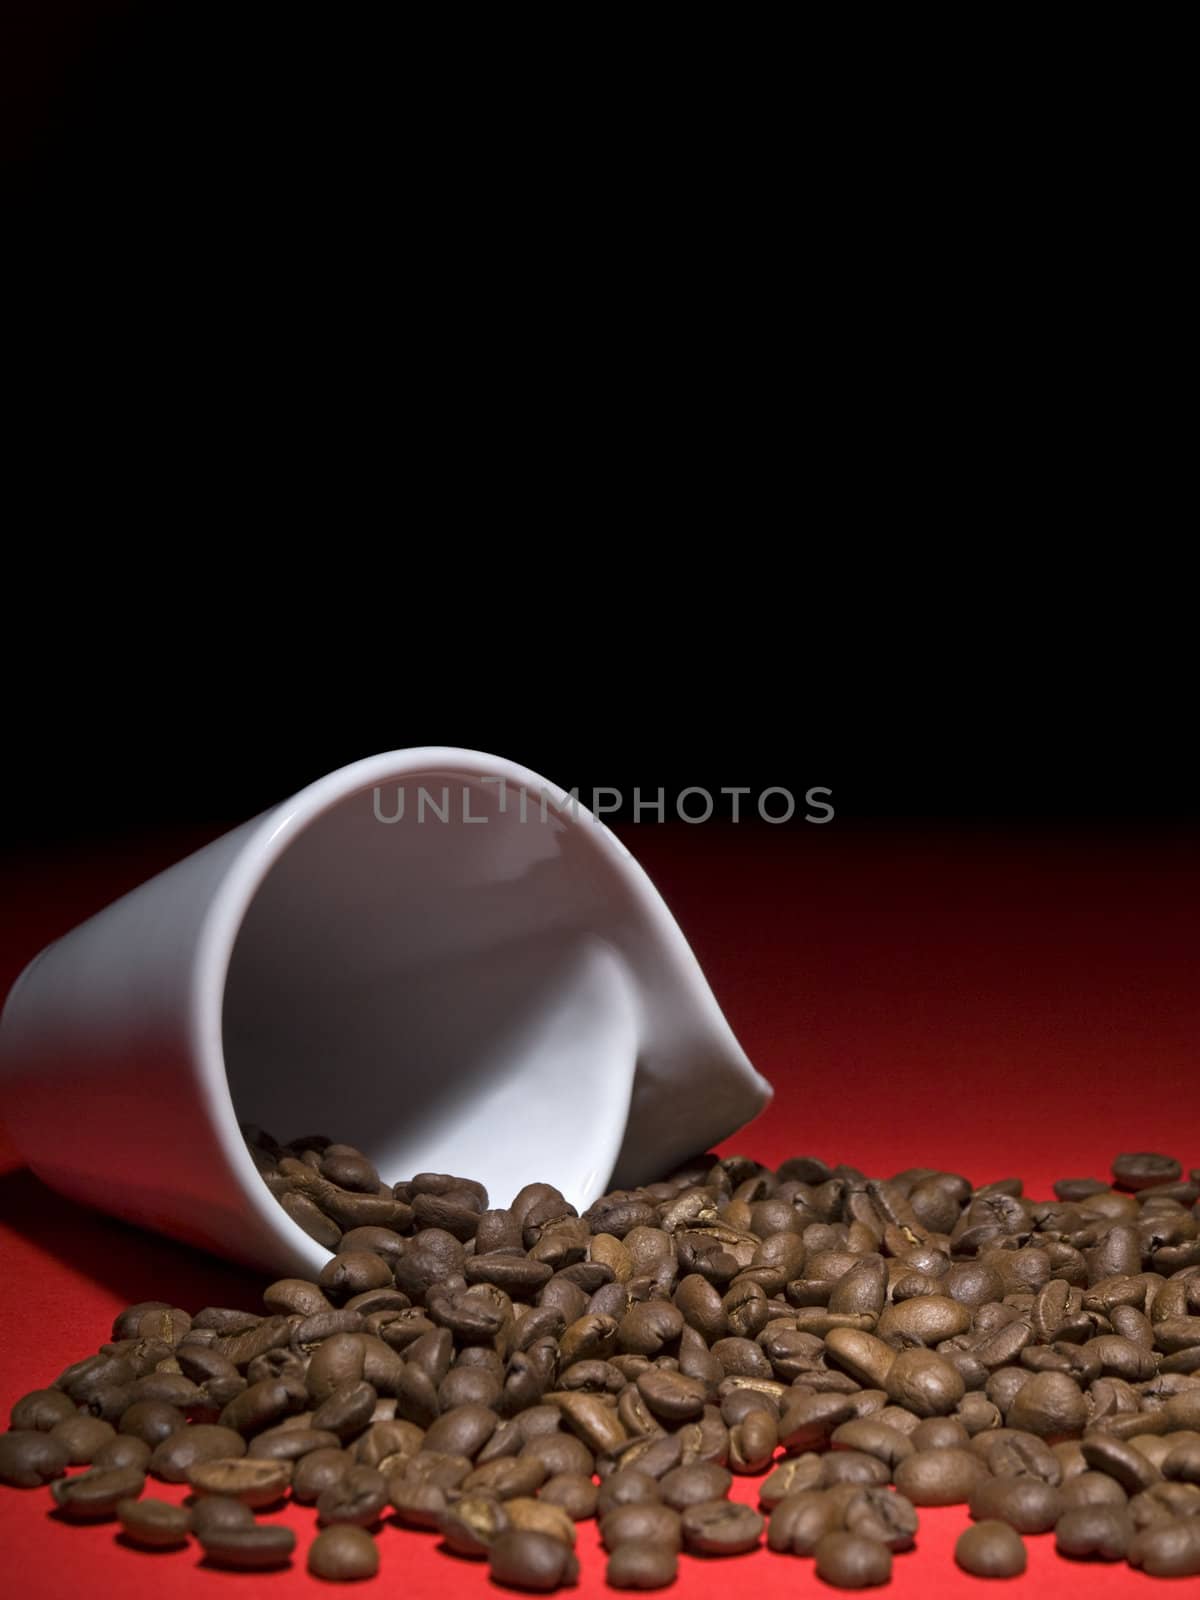 A fallen cup with coffee beans spread out.